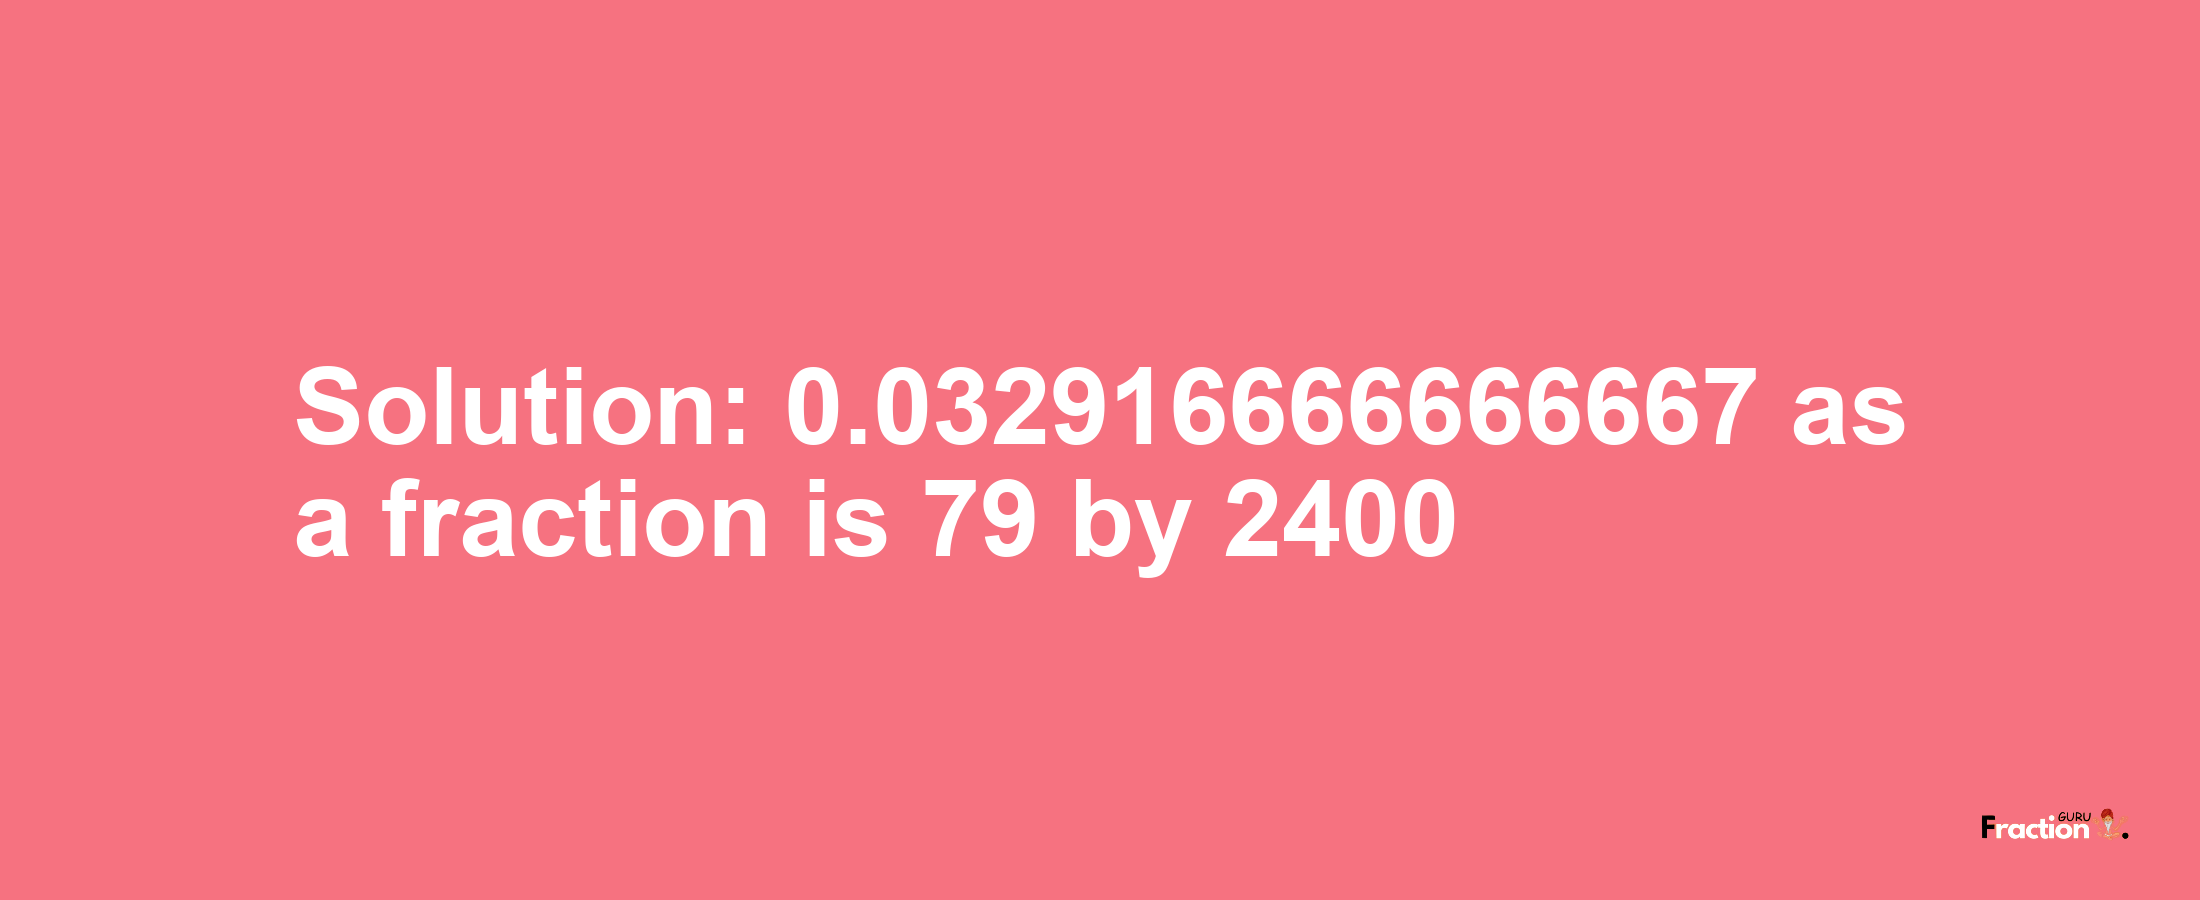 Solution:0.032916666666667 as a fraction is 79/2400